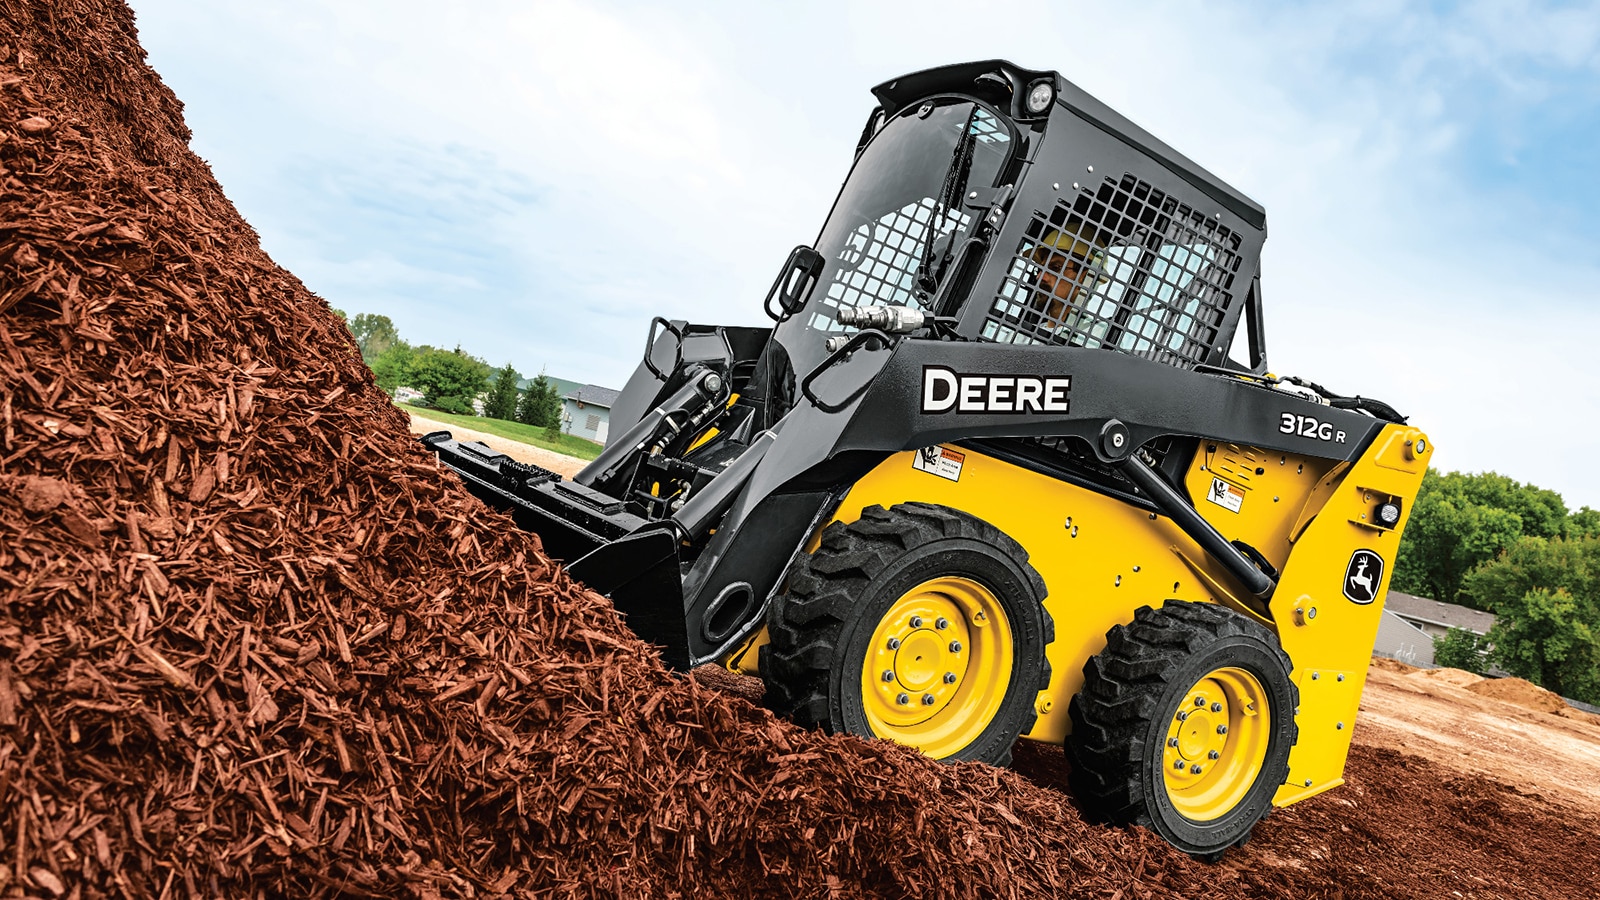 312GR Skid Steer scoops up a bucket of red mulch from a large pile